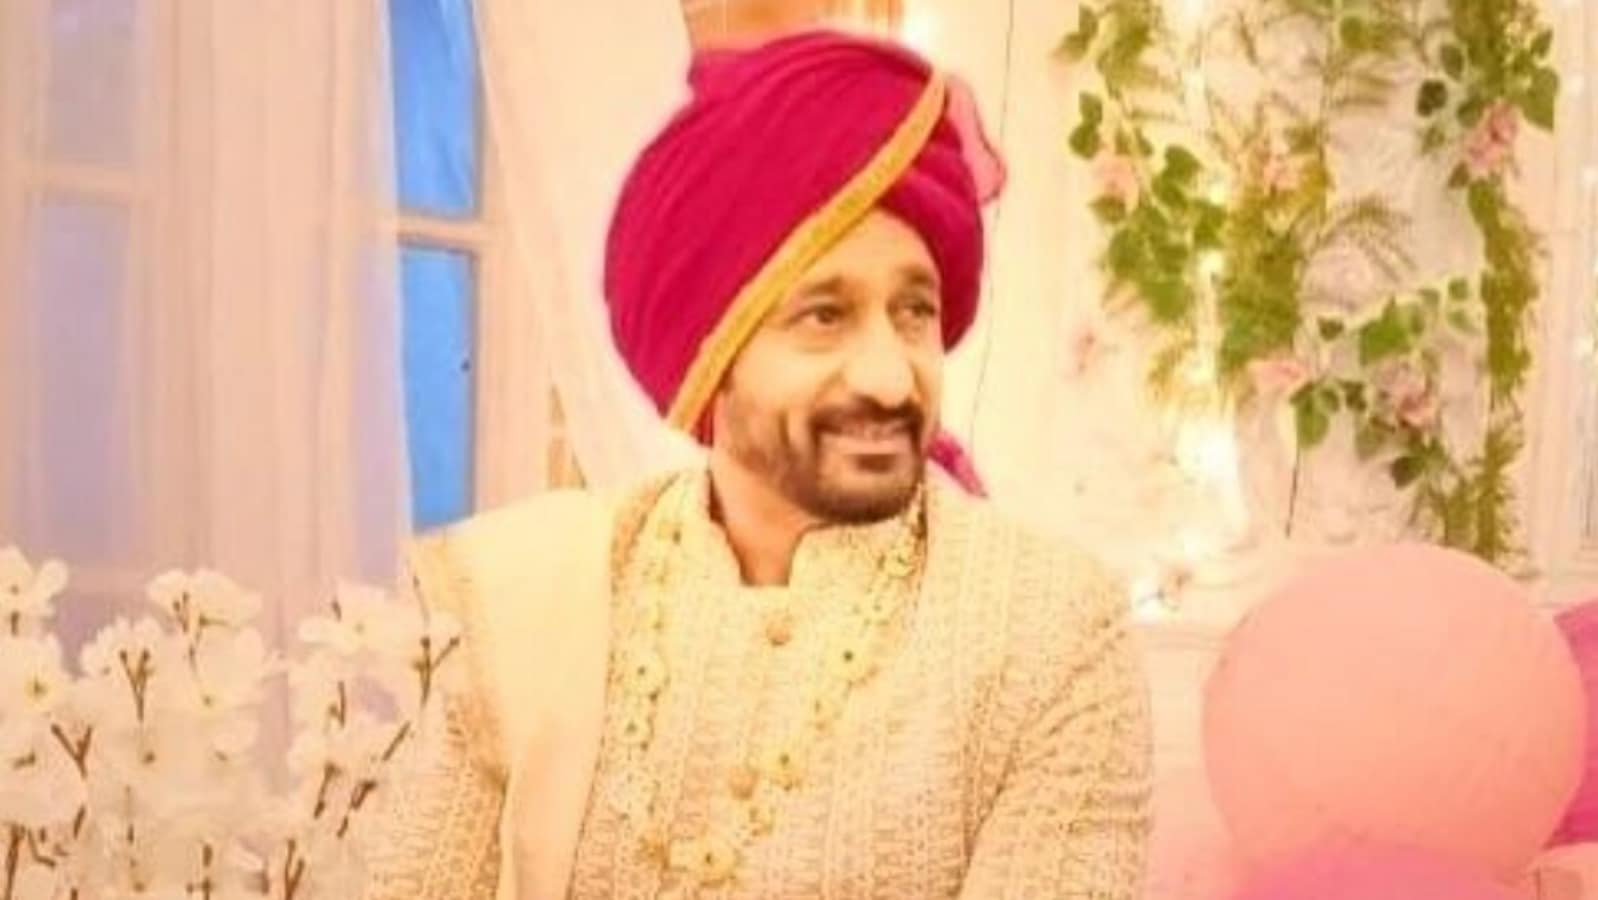 After sharing ‘wedding pic’, Rajev Paul clarifies he’s not actually married: ‘Khush rehne do yaar’